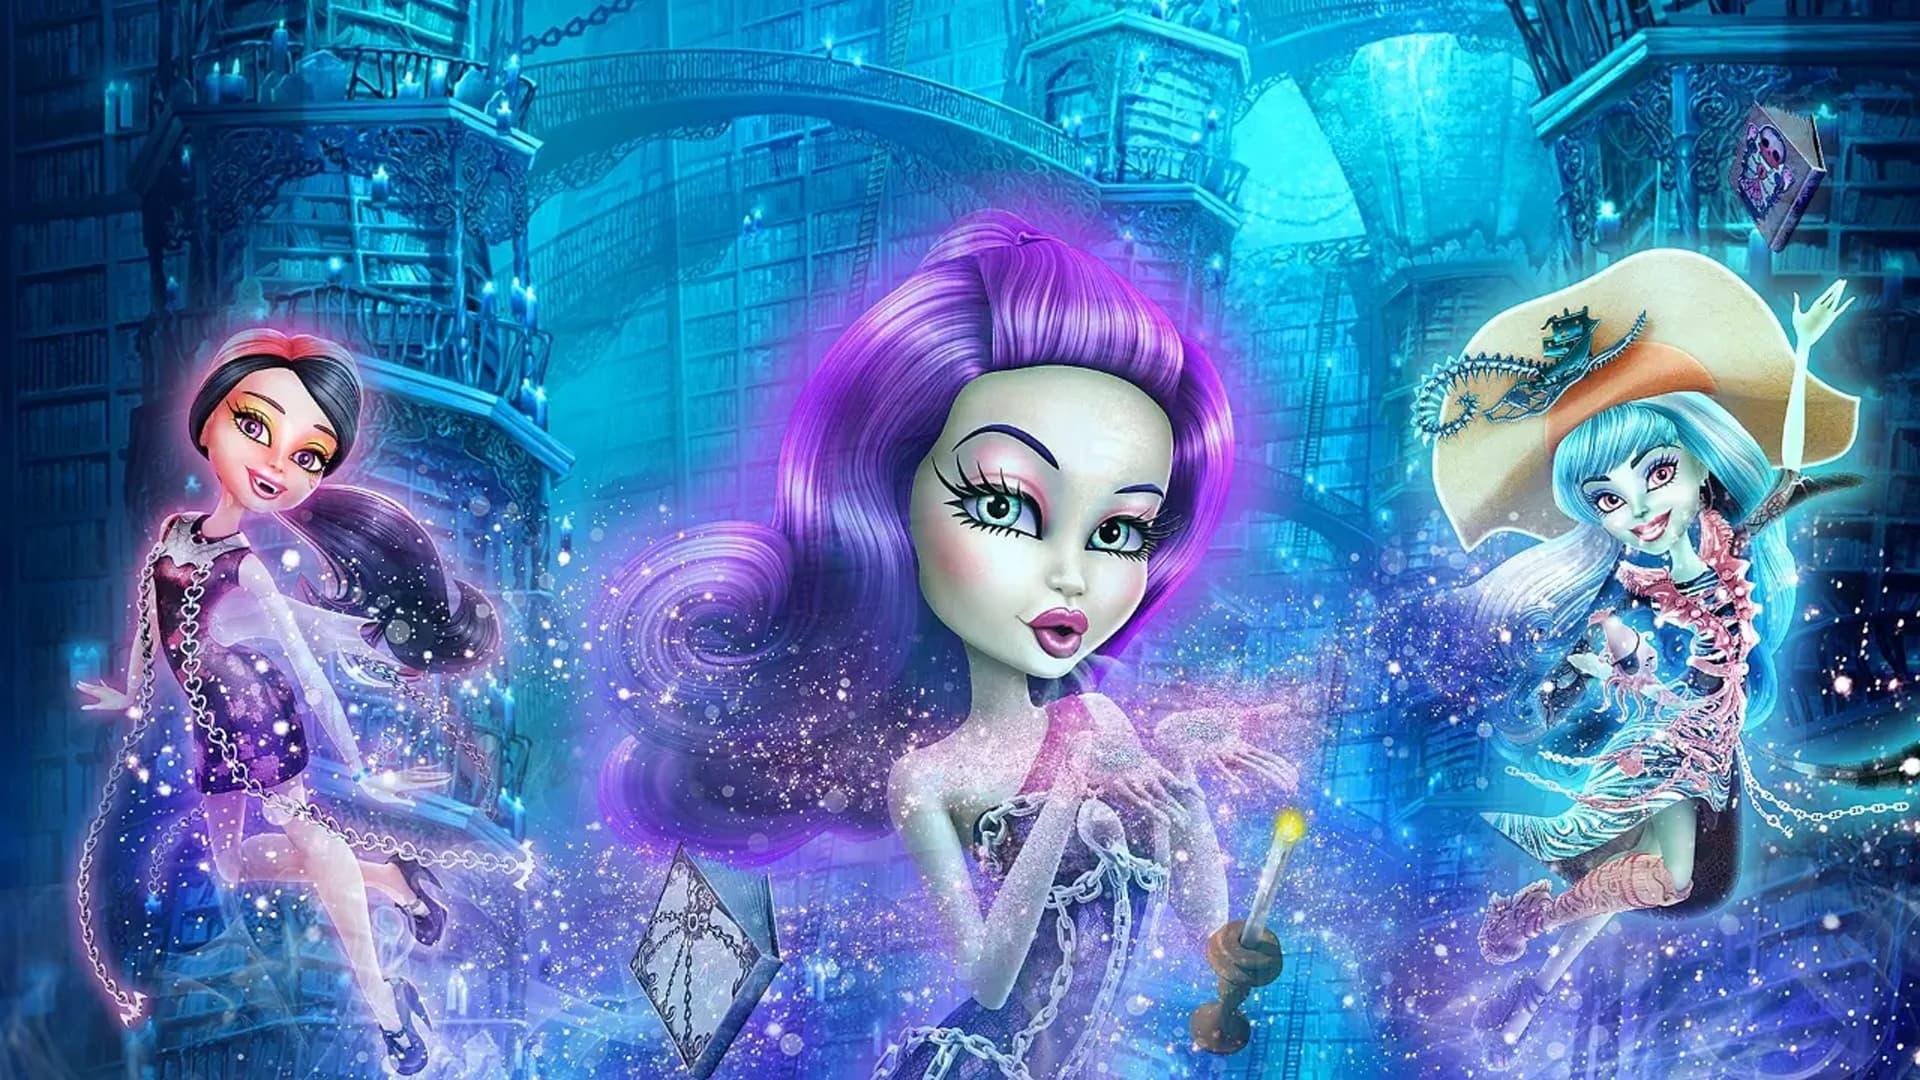 Monster High: Haunted backdrop